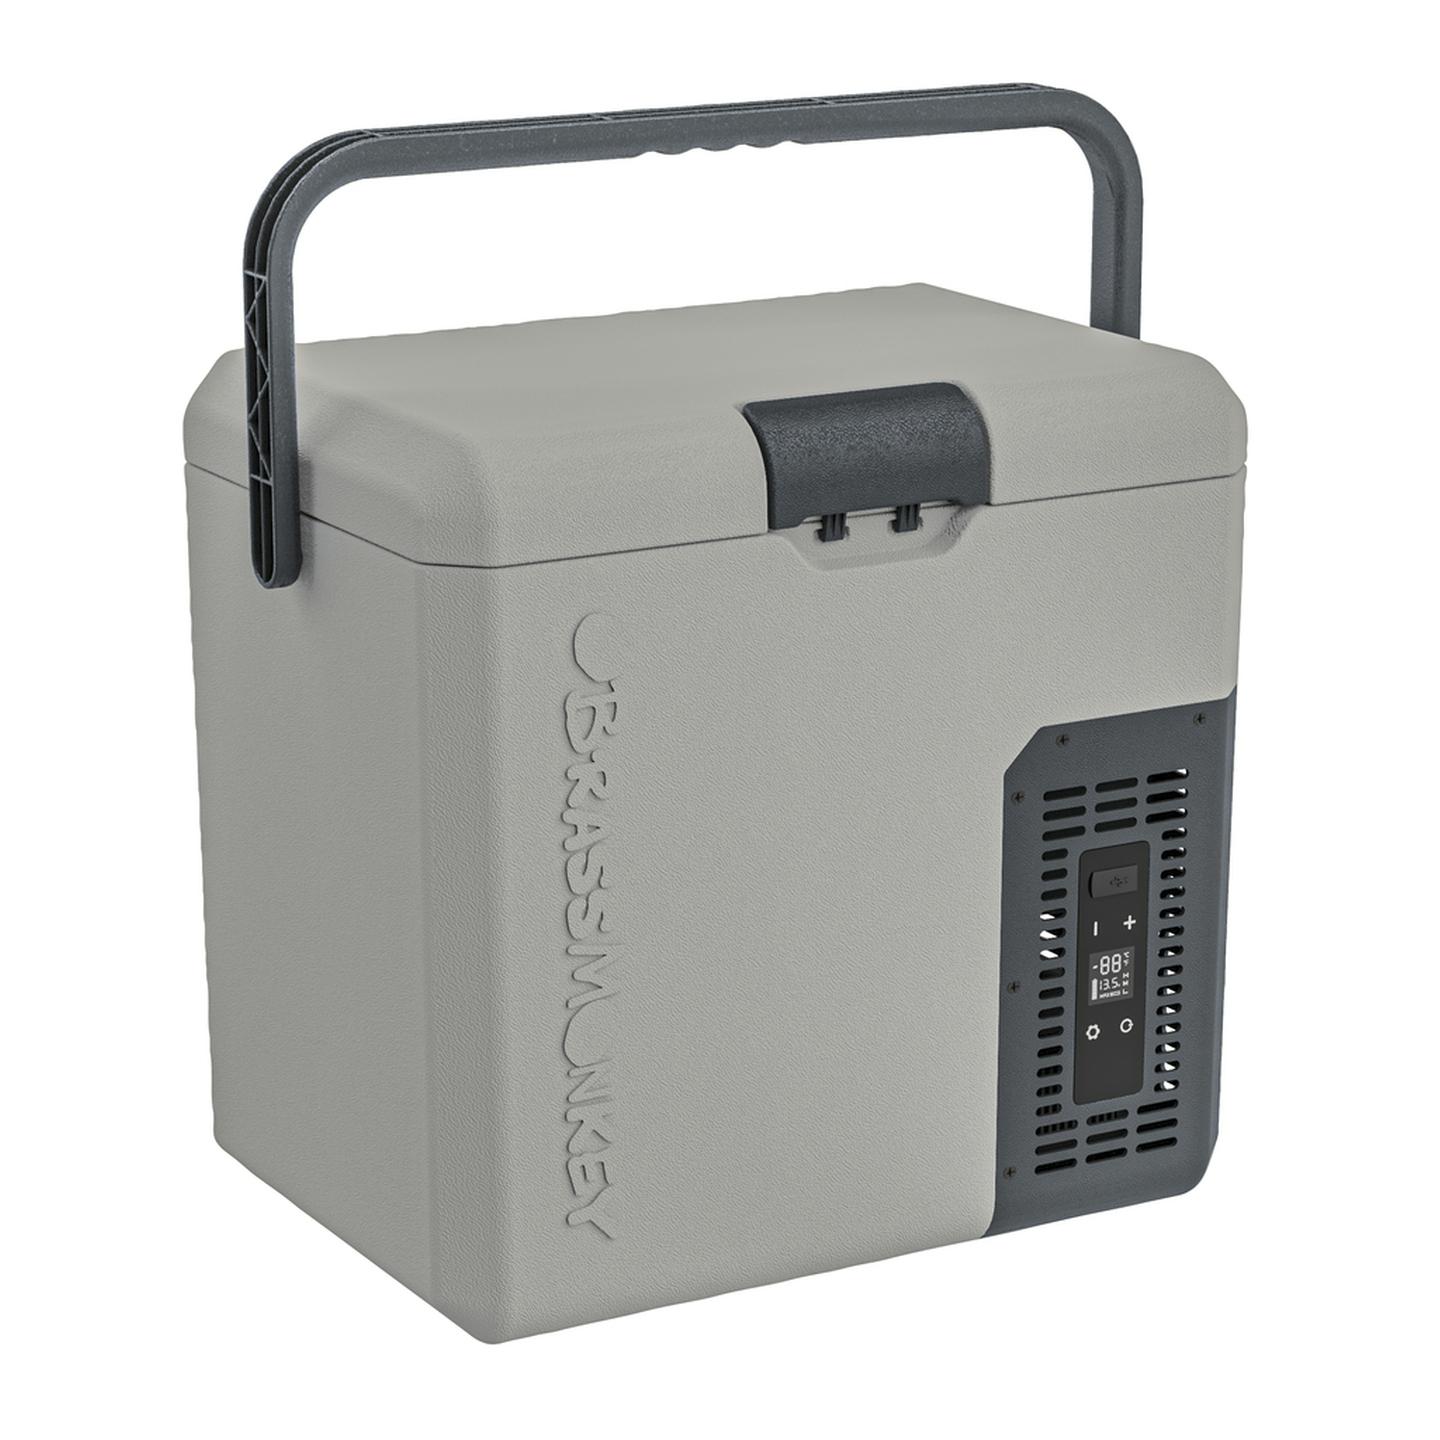 18L Brass Monkey Portable Fridge/Freezer with Carry Handle and Battery Compartment - Grey/Dark Grey